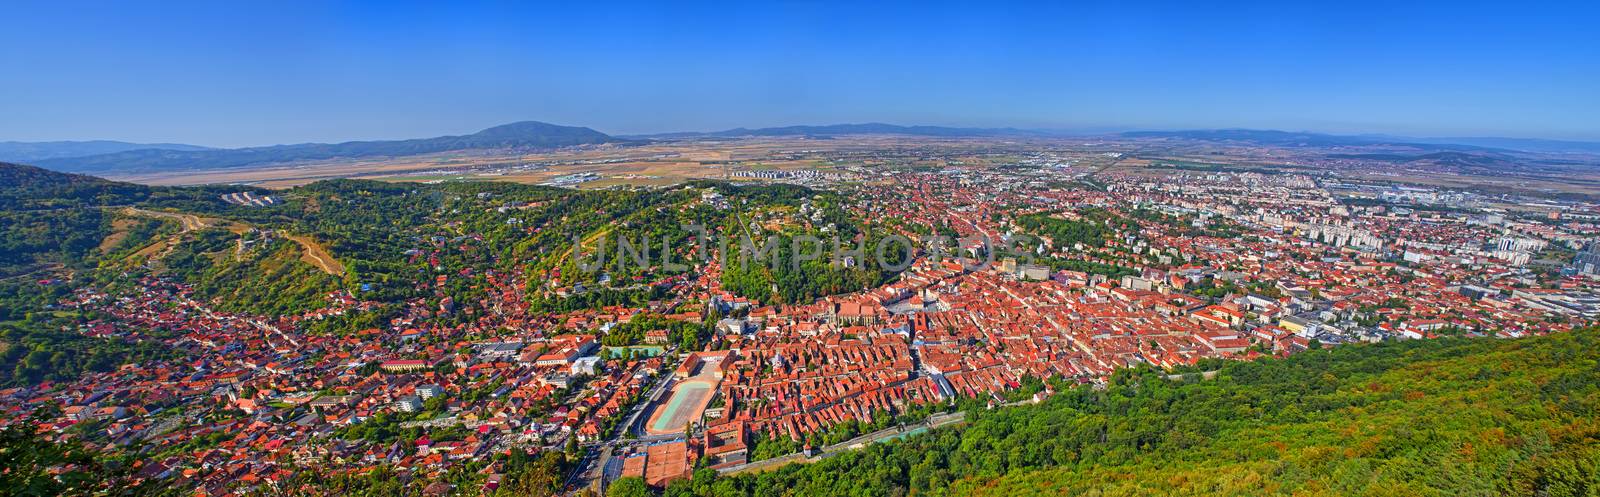 Brasov panorama cityscape from the top by savcoco